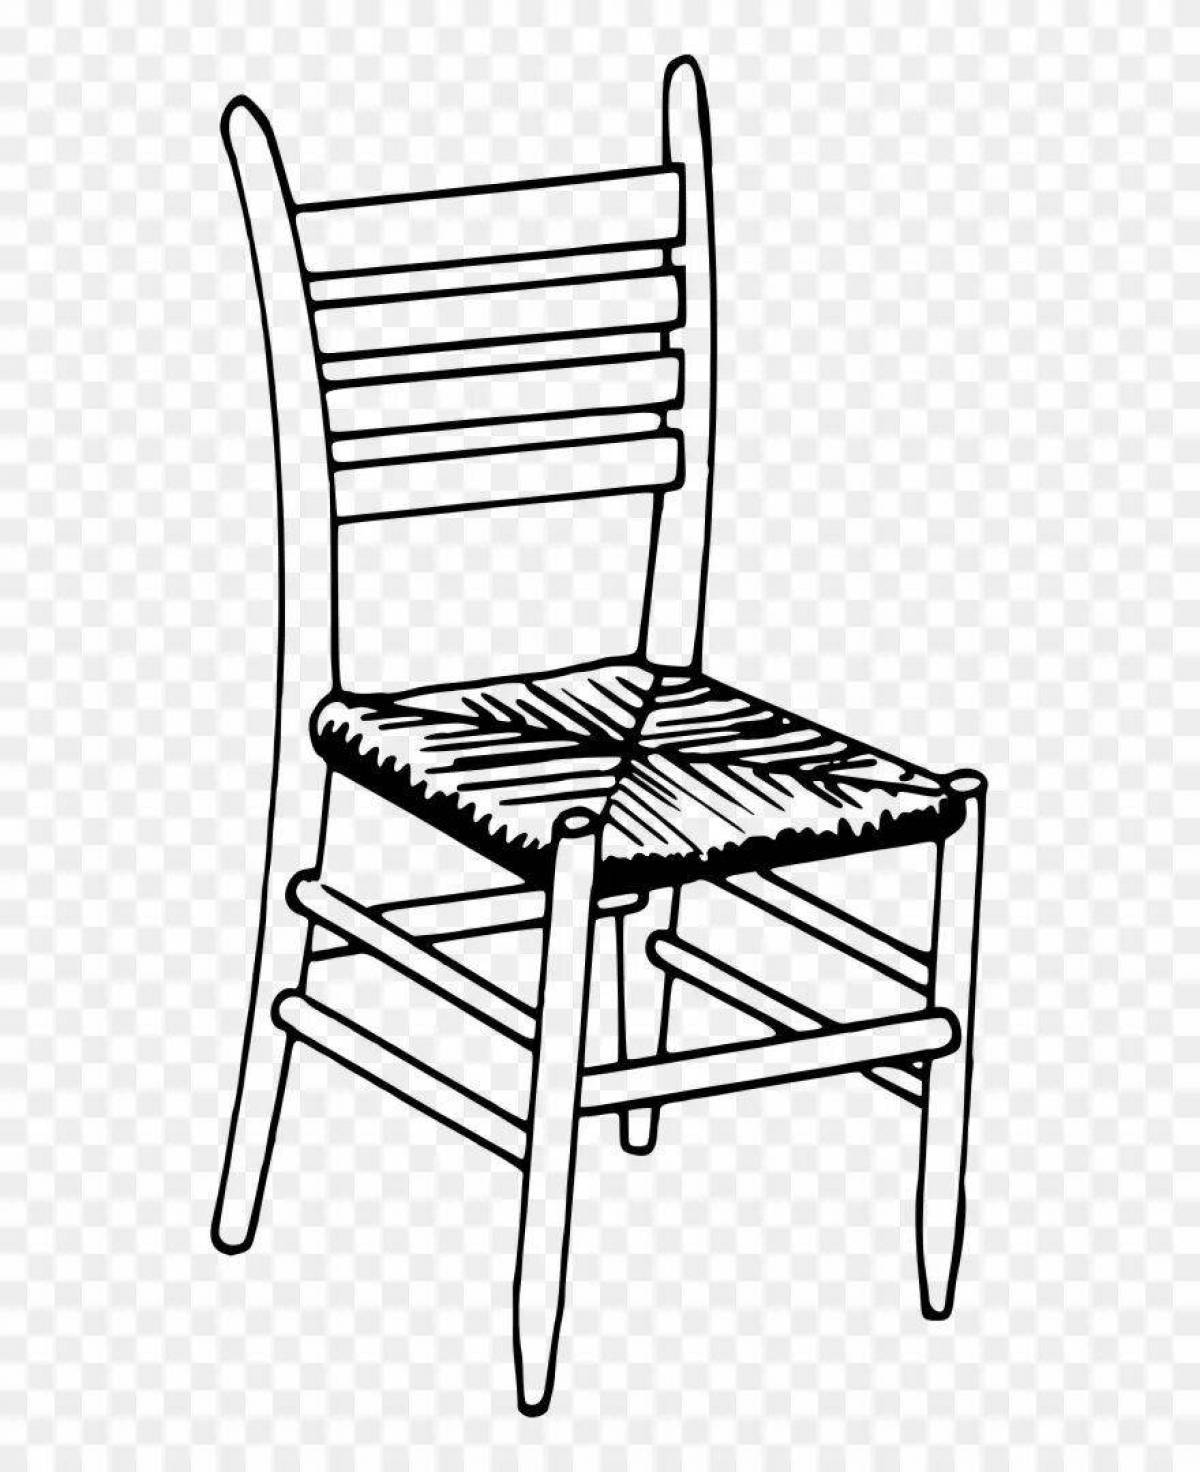 Coloring book dazzling high chair